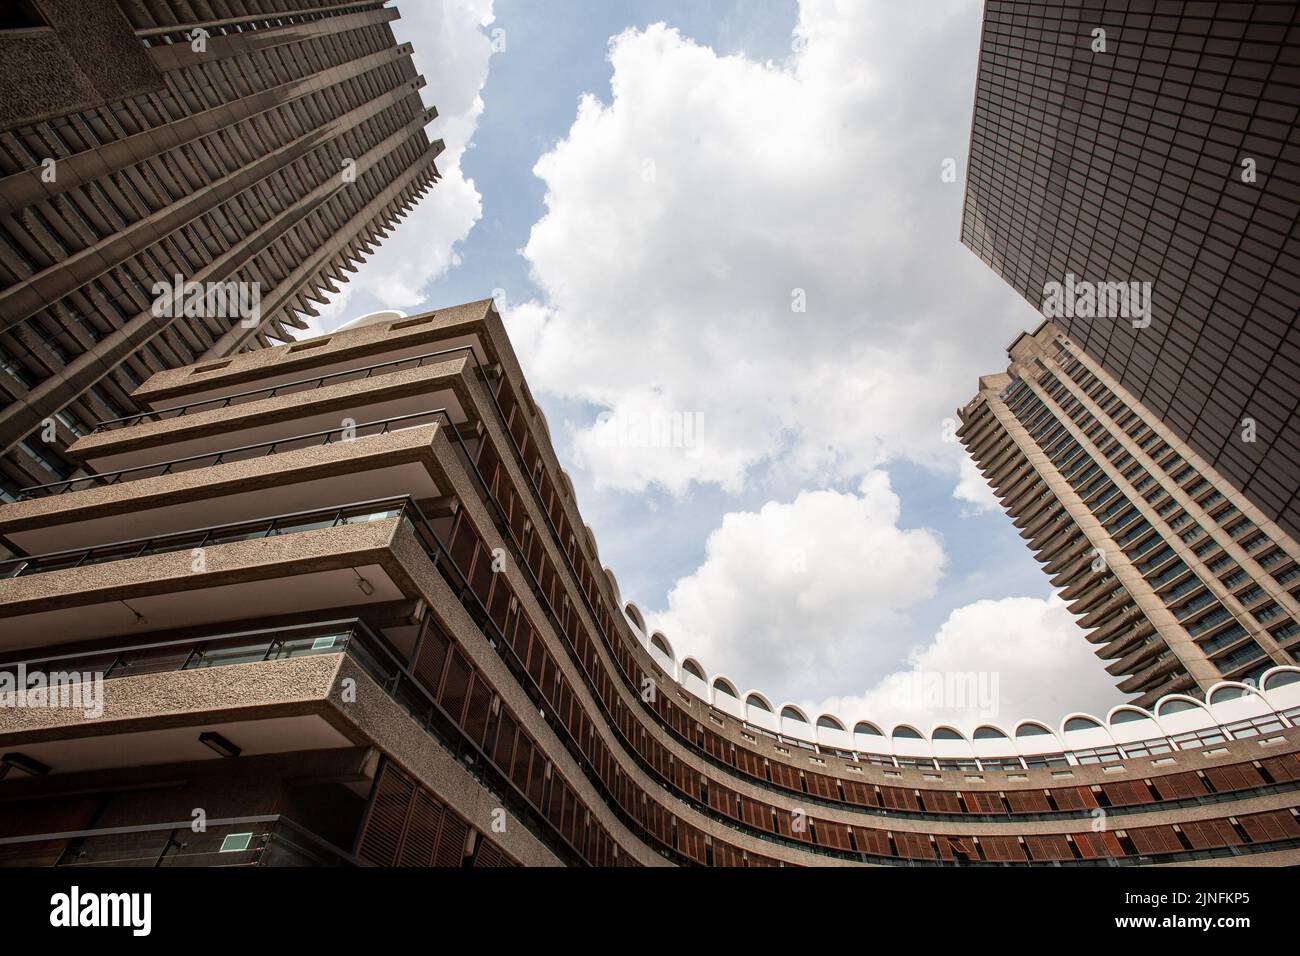 Barbican Estate, London. A low, wide angle view of the brutalist architecture within the Barbican Estate in the City of London. Stock Photo